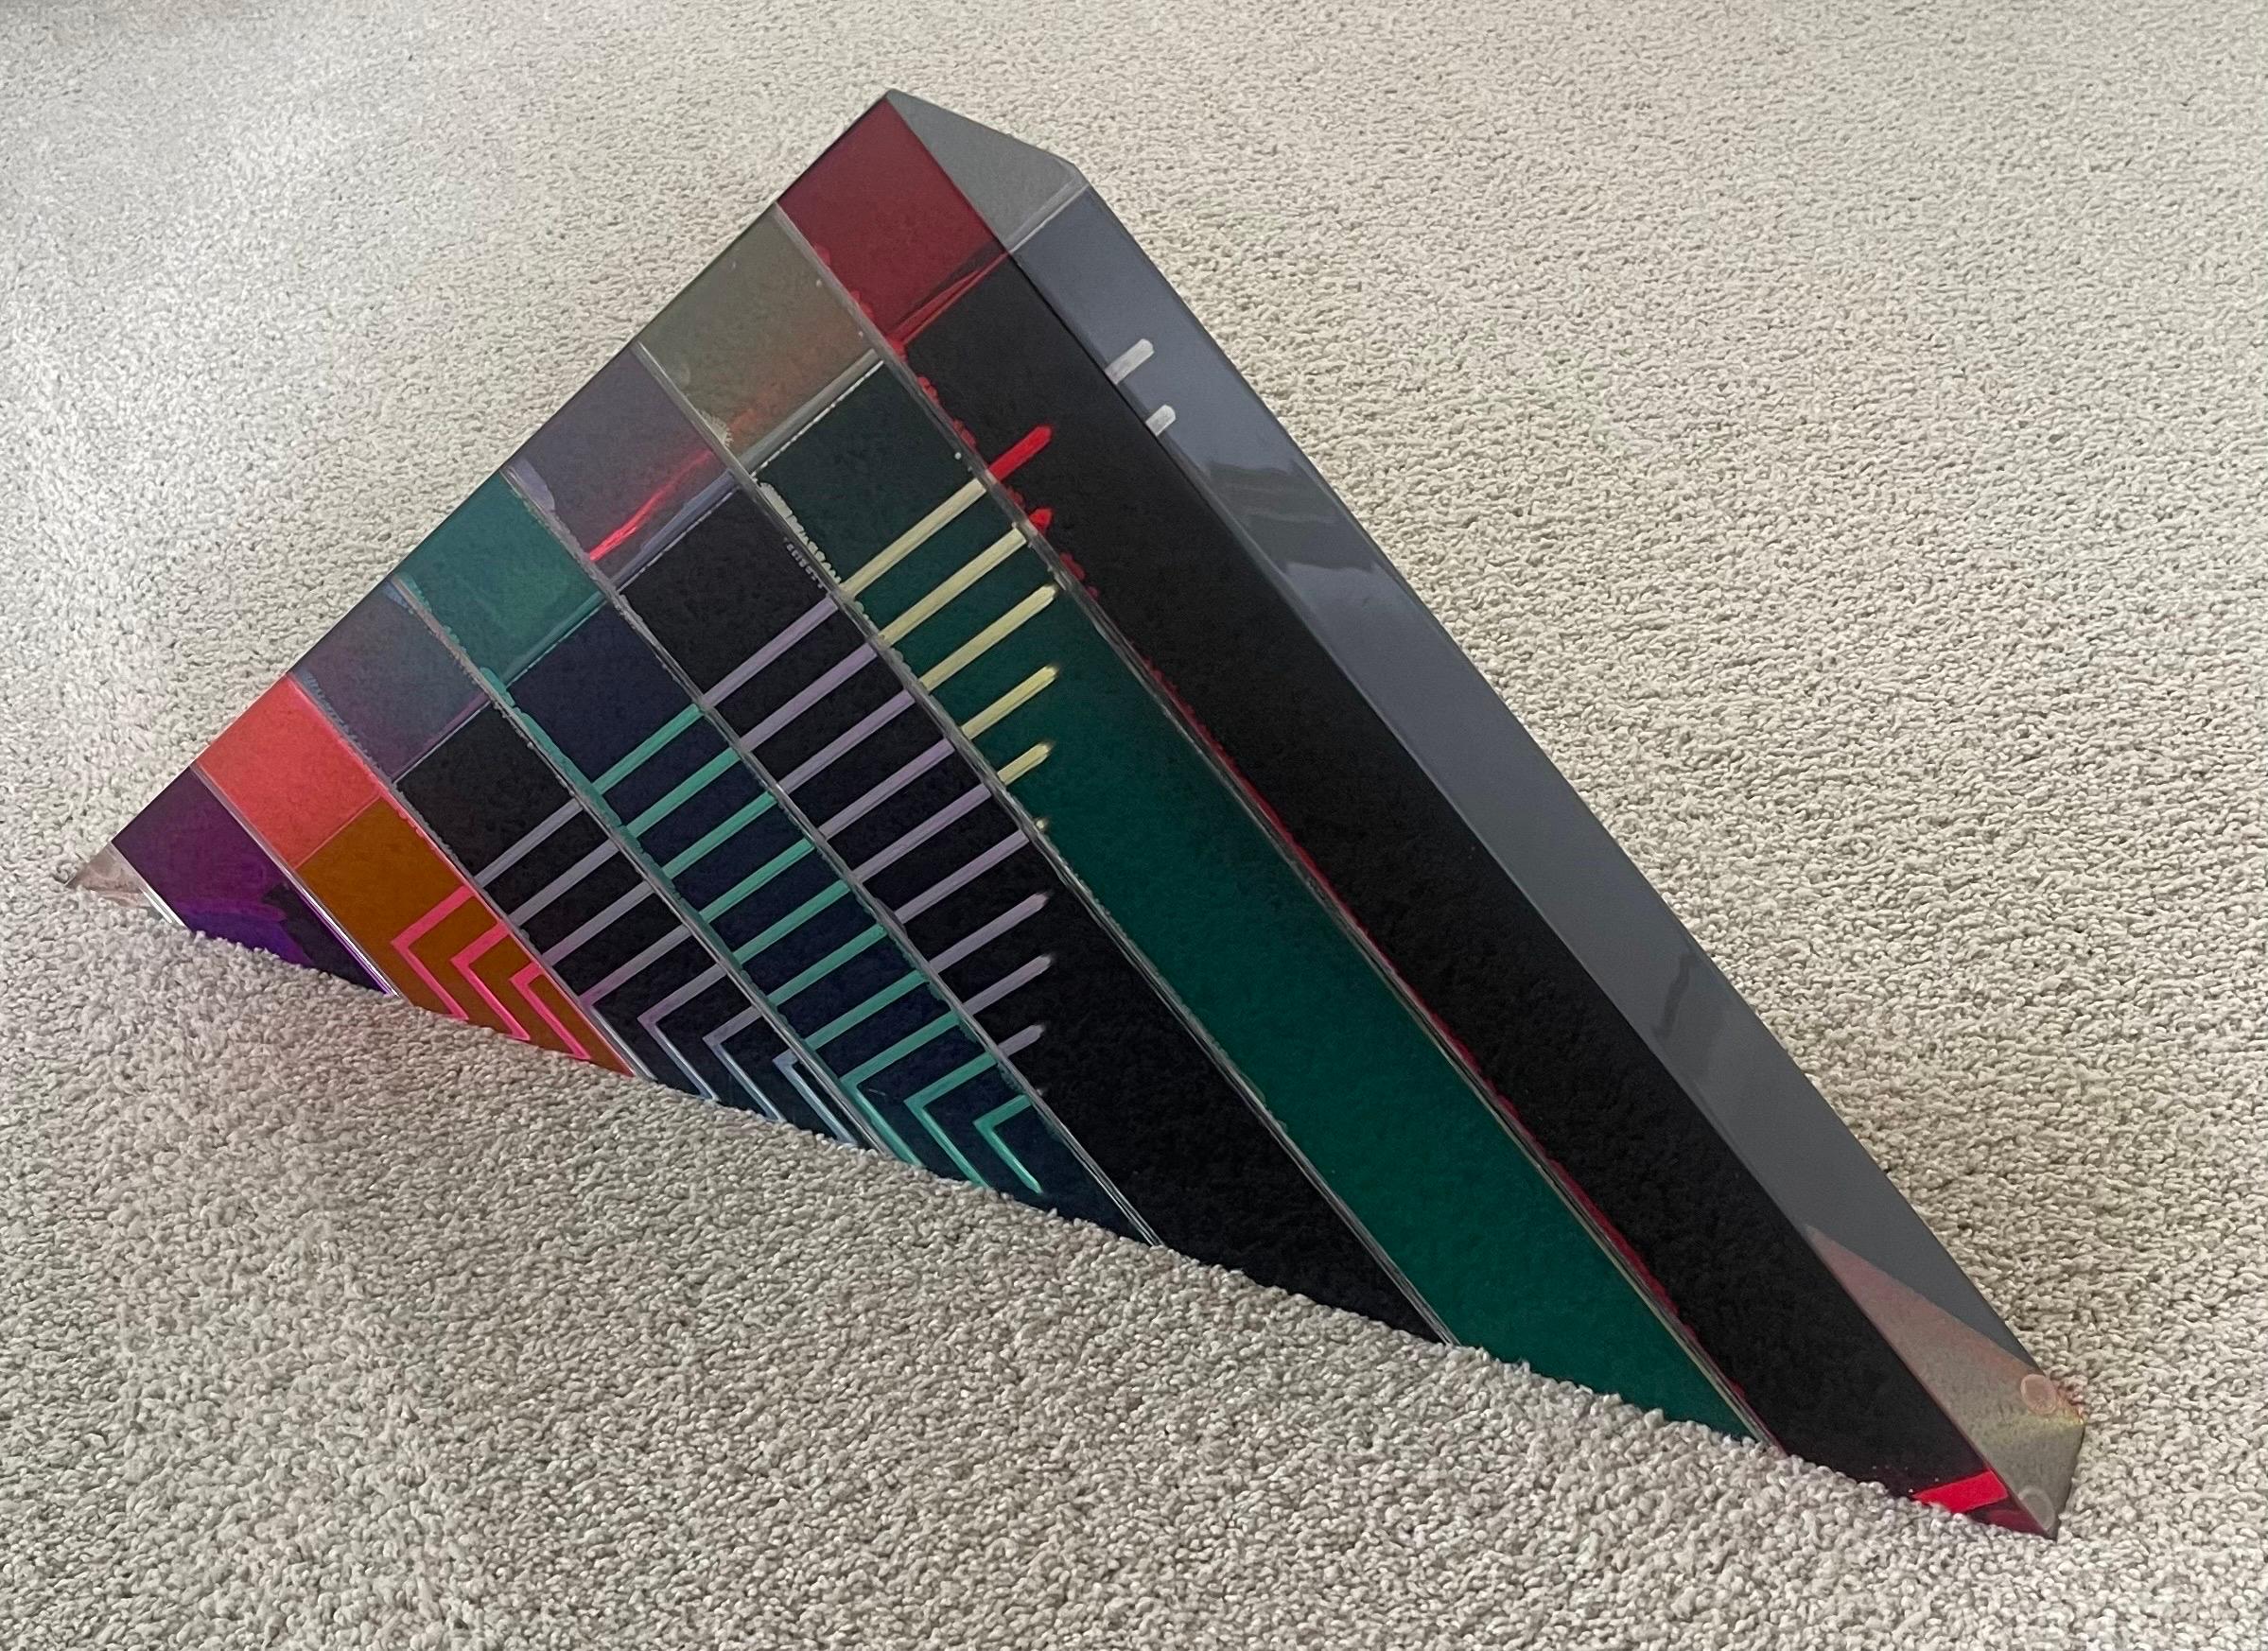 Large Colorful Triangular Lucite Sculpture by Shlomi Haziza 4